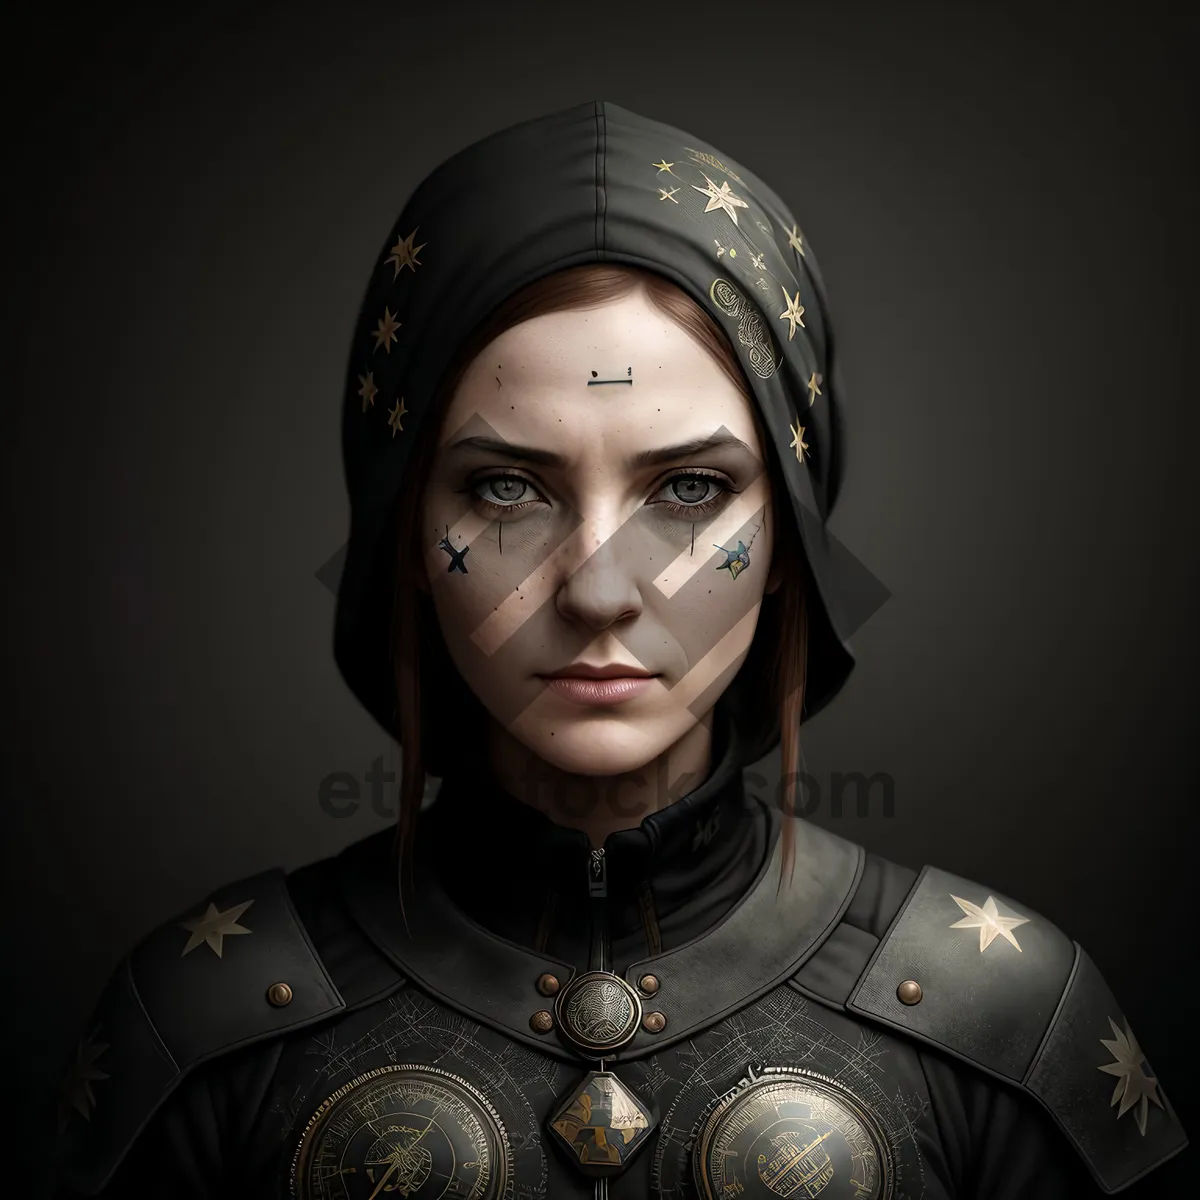 Picture of Black Armor-Fashion: Stylish Astronaut-Inspired Face Covering